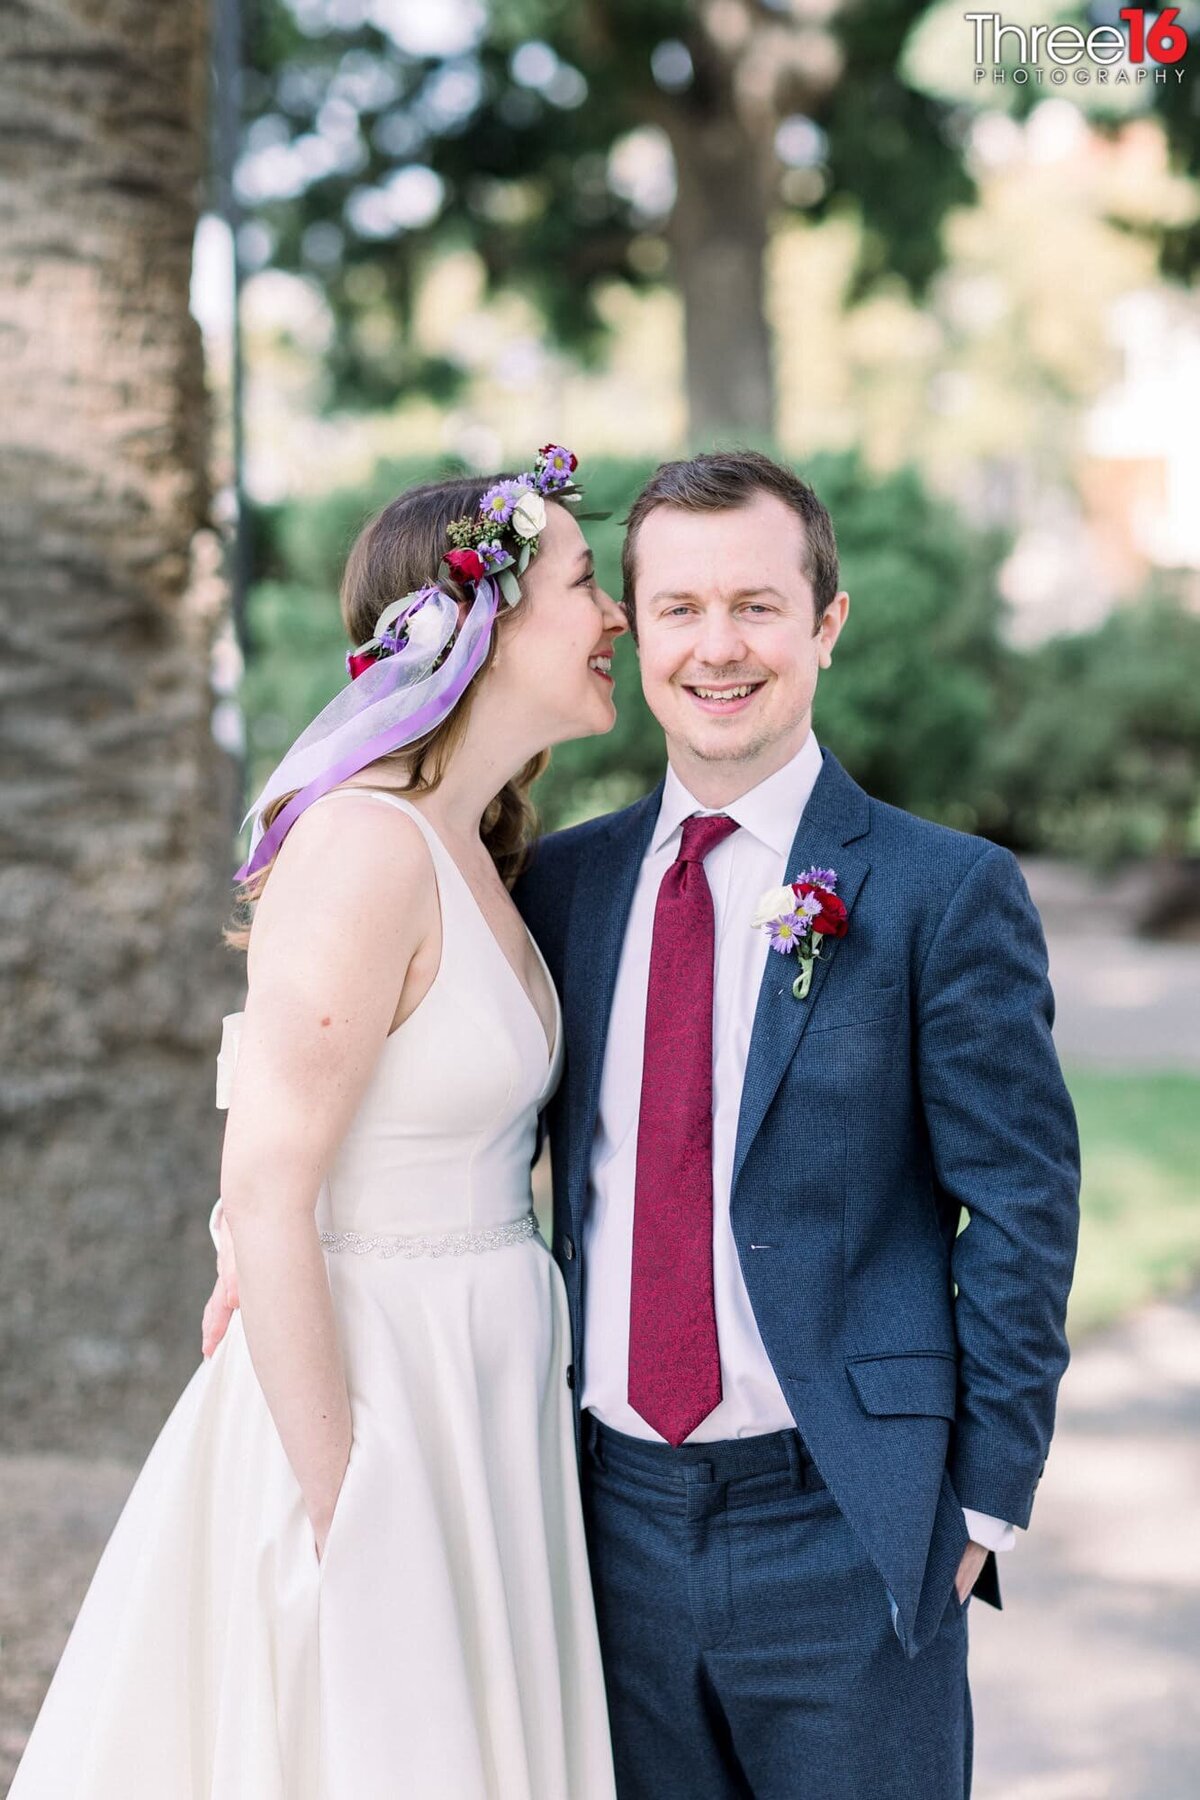 Groom smiles as his Bride whispers into his ear